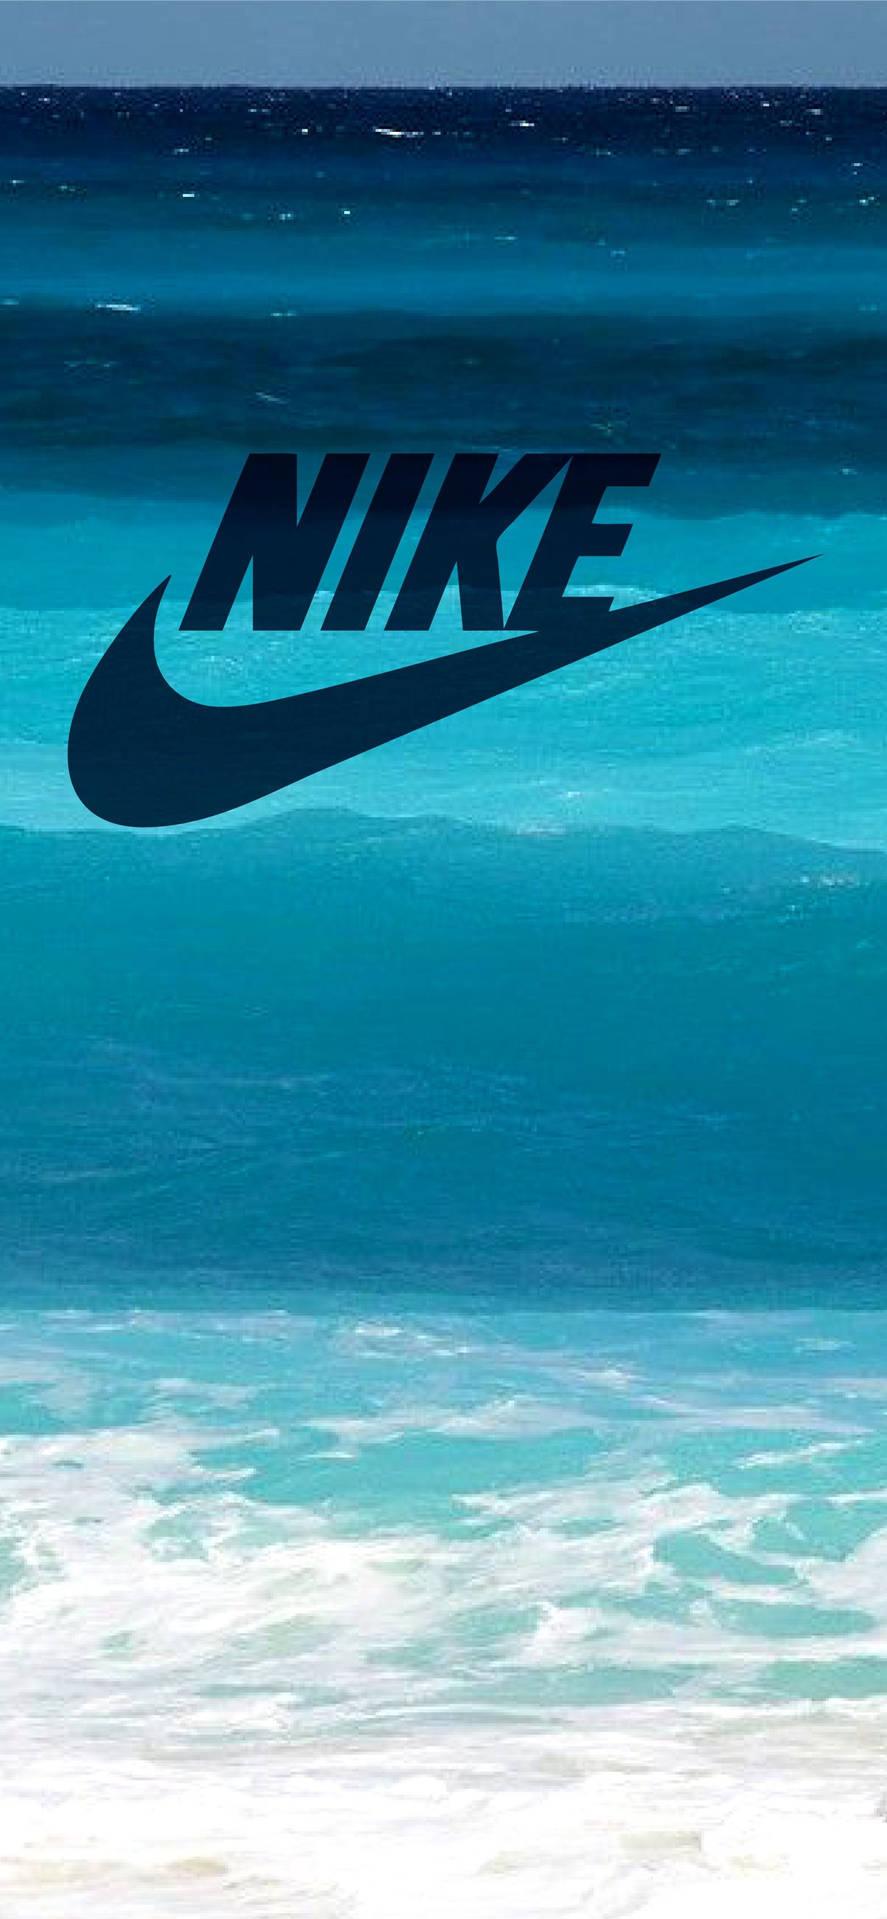 Waves Shore Nike iPhone Background Wallpaper